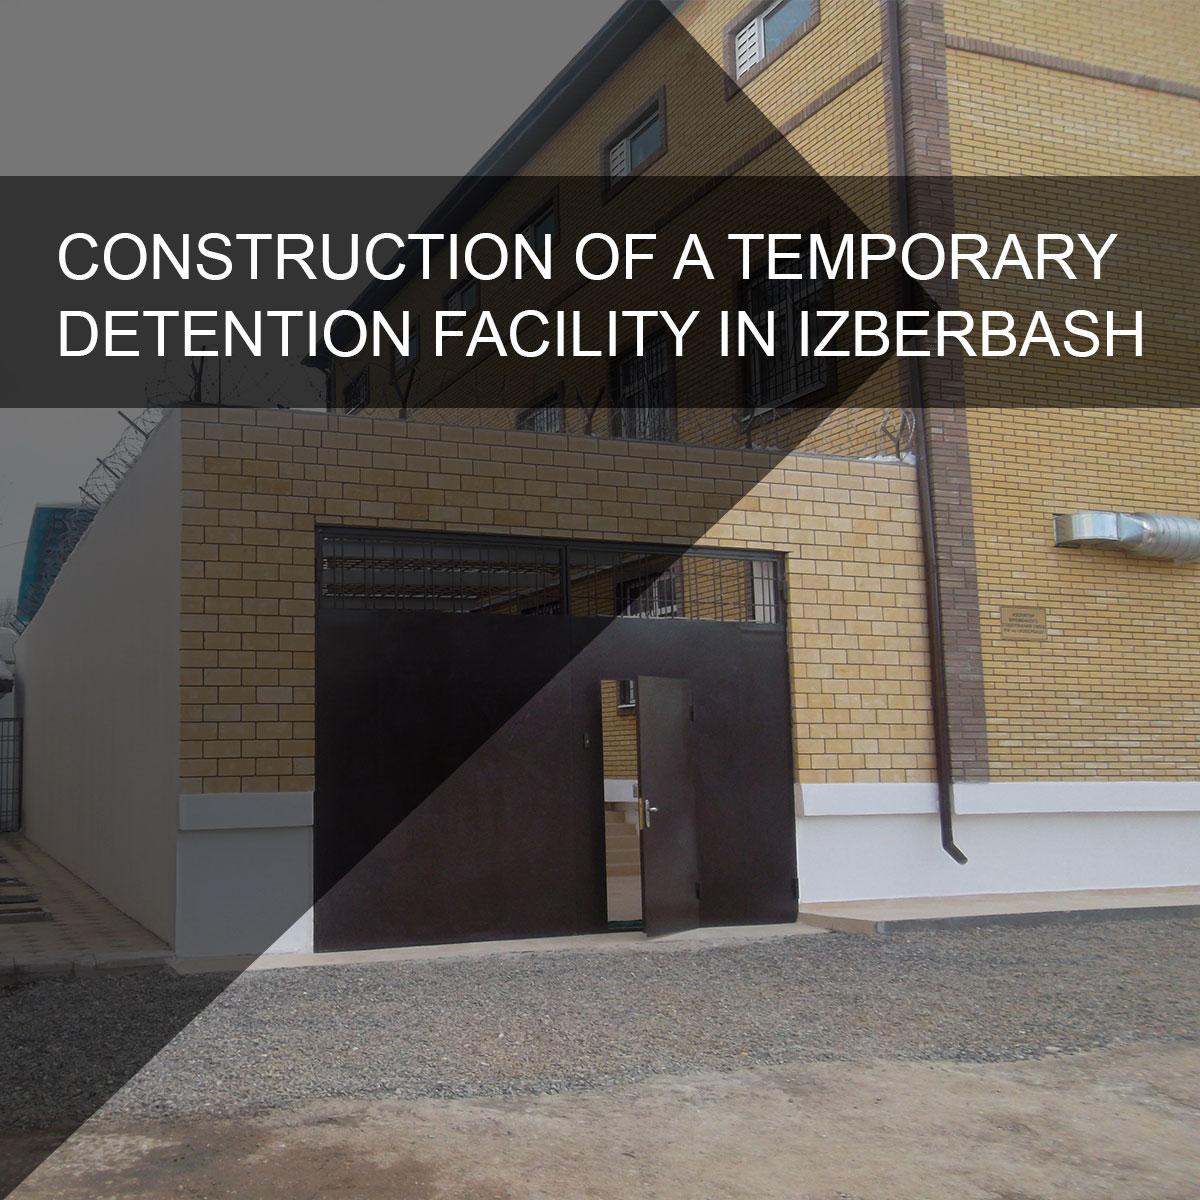 Construction of a temporary detention facility in Izberbash